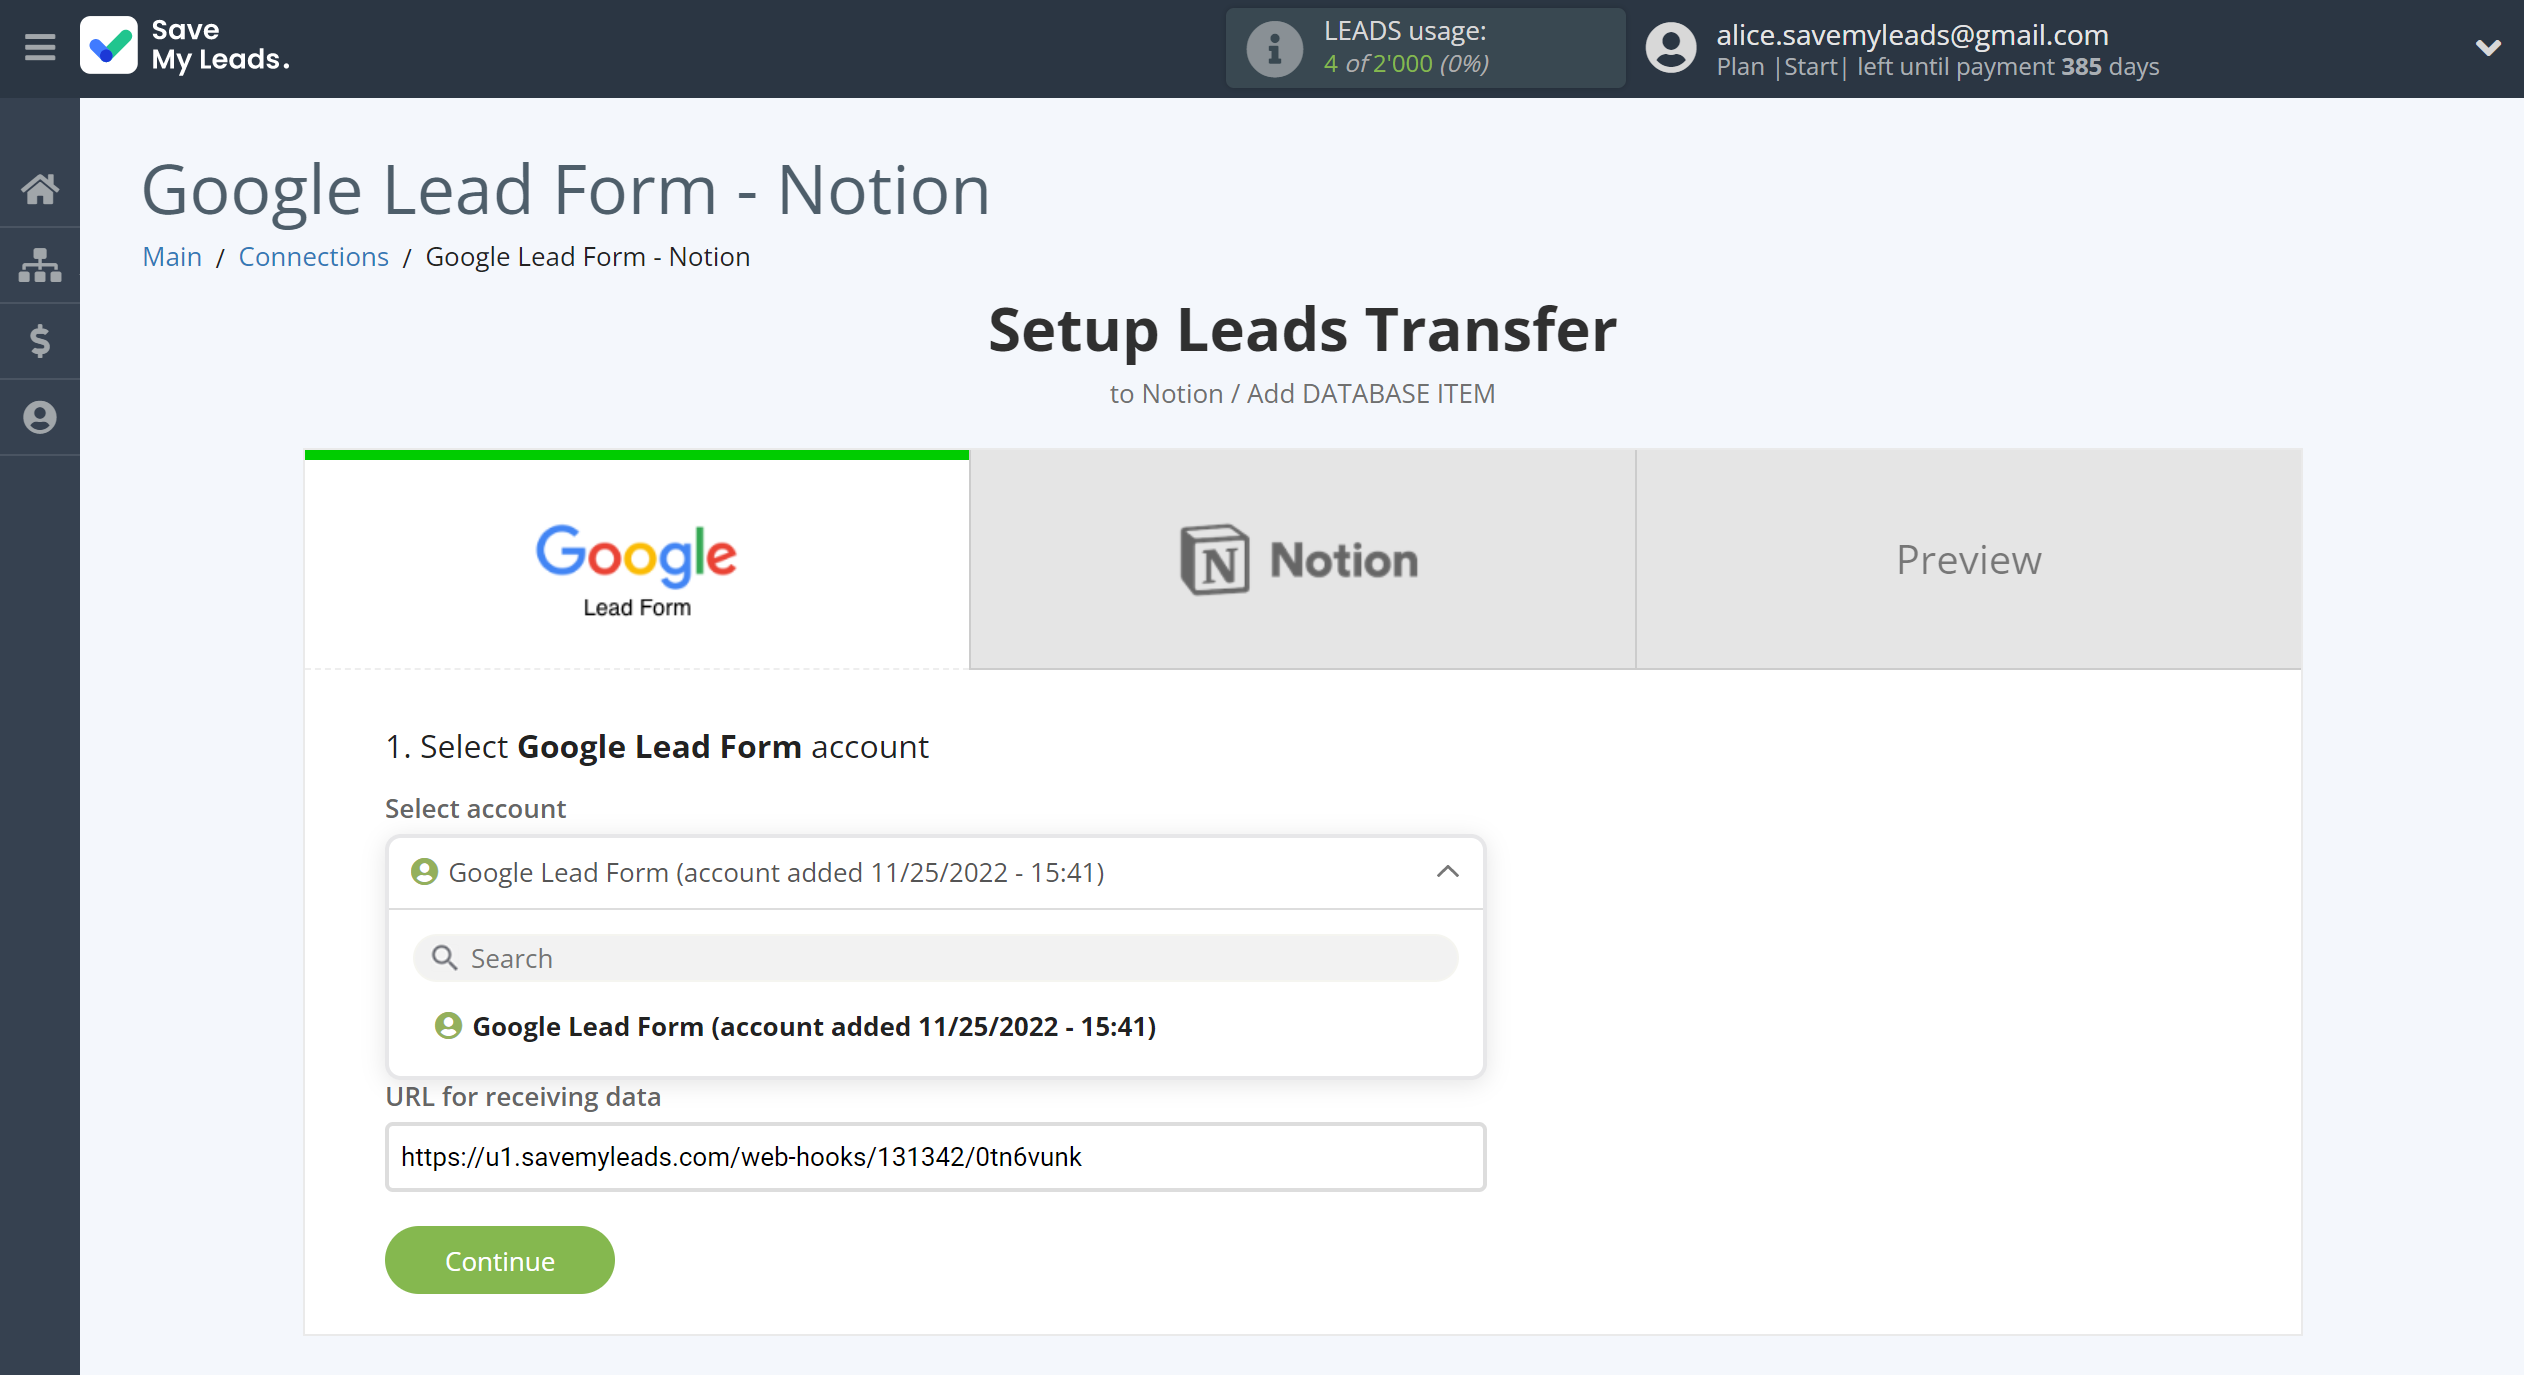 How to Connect Google Lead Form with Notion | Data Source account selection